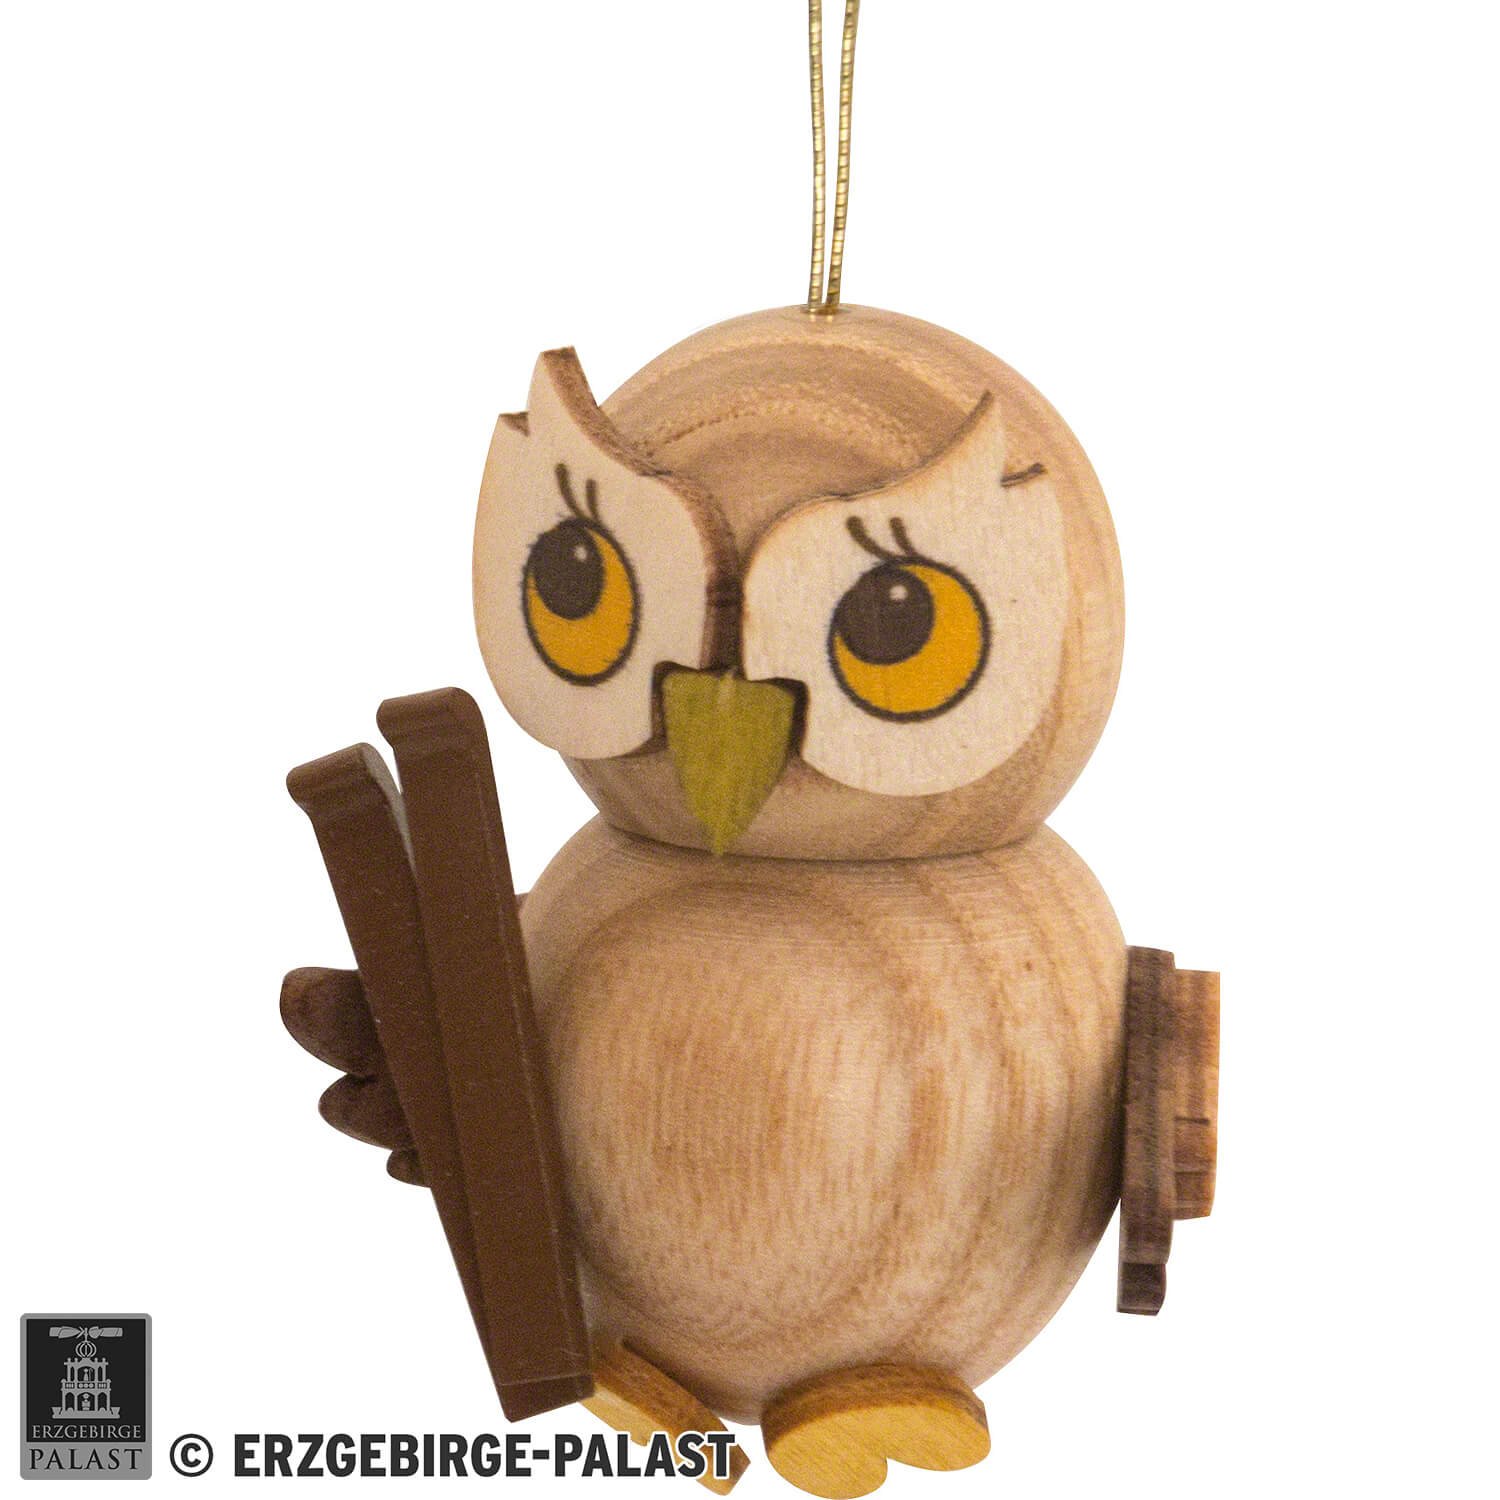 Tree Ornament - Owl Child with Book (4 cm/1.6in) by Drechslerei Kuhnert